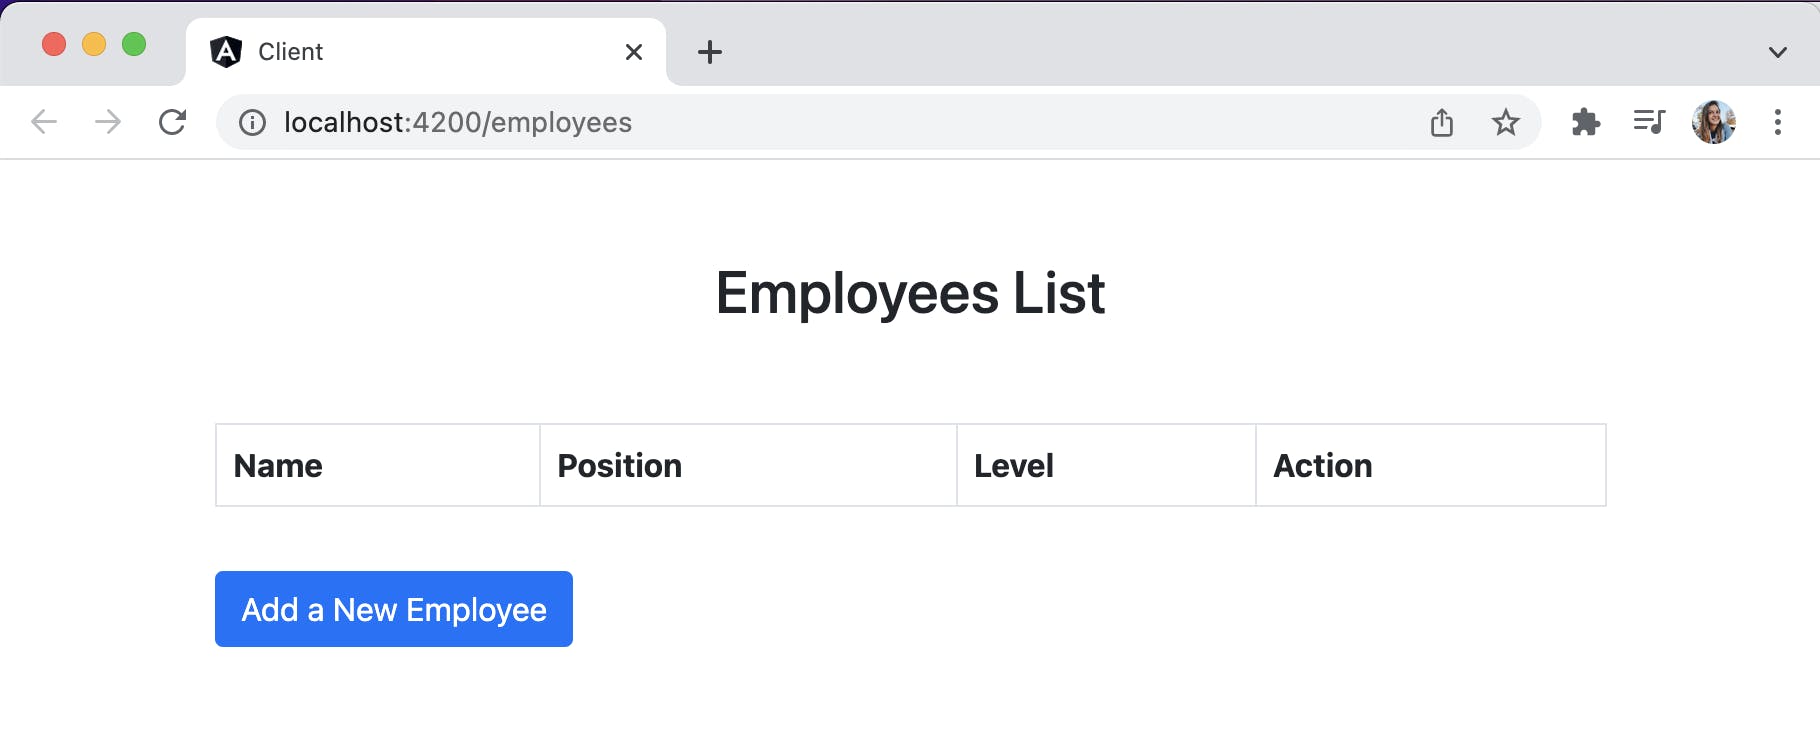 Employees list table